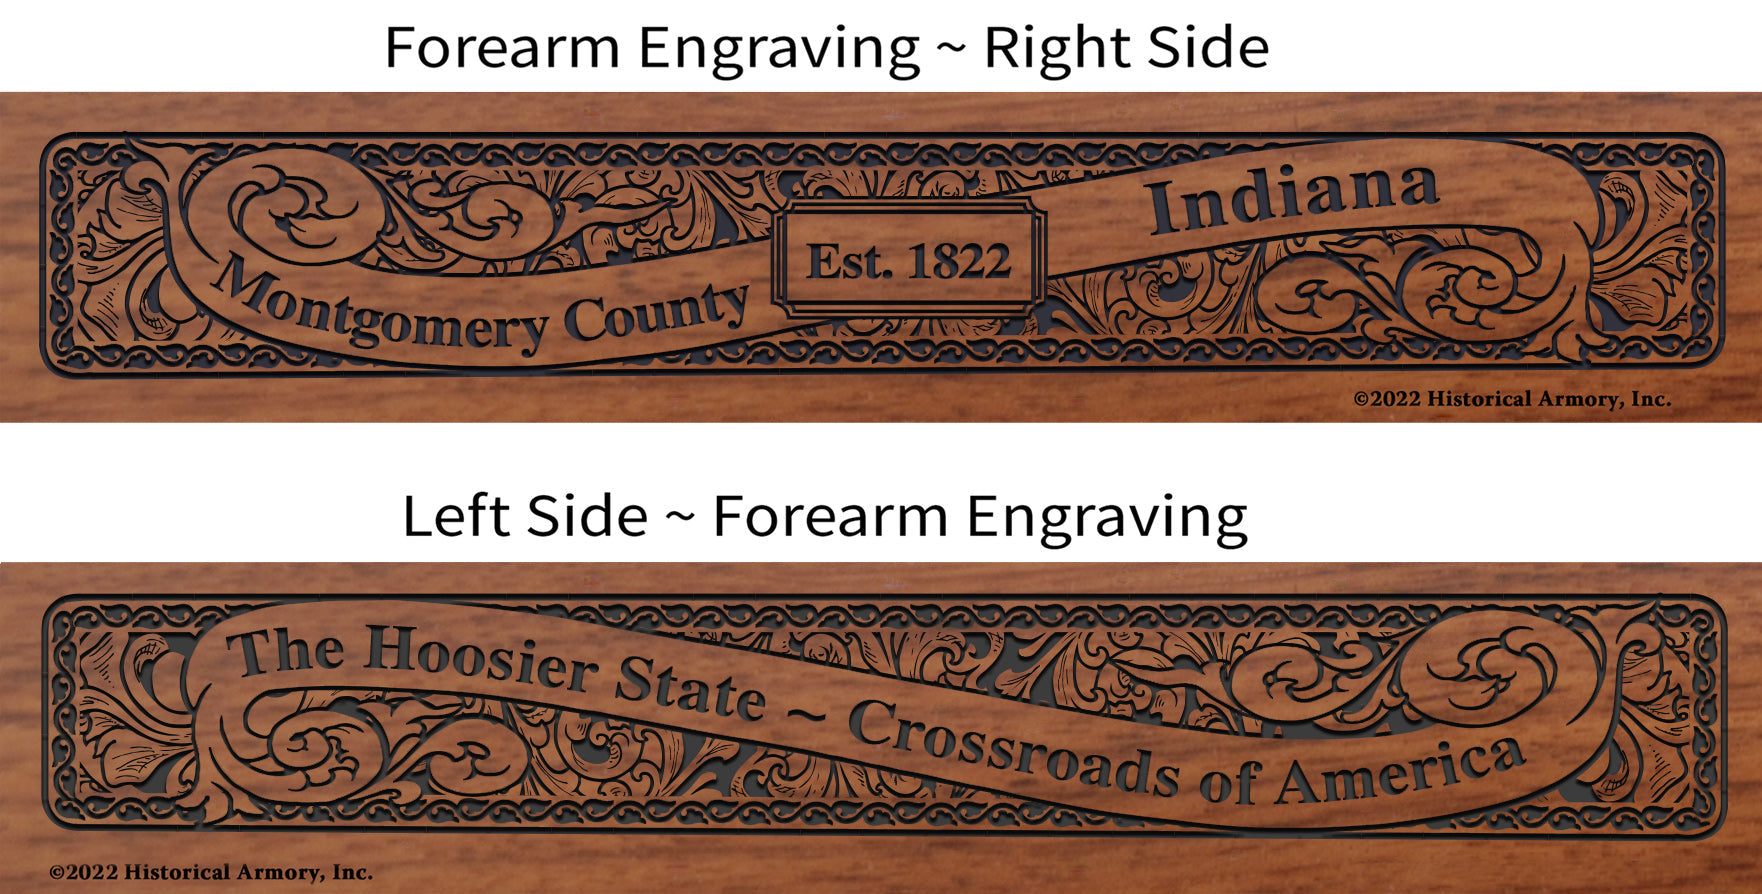 Montgomery County Indiana Engraved Rifle Forearm